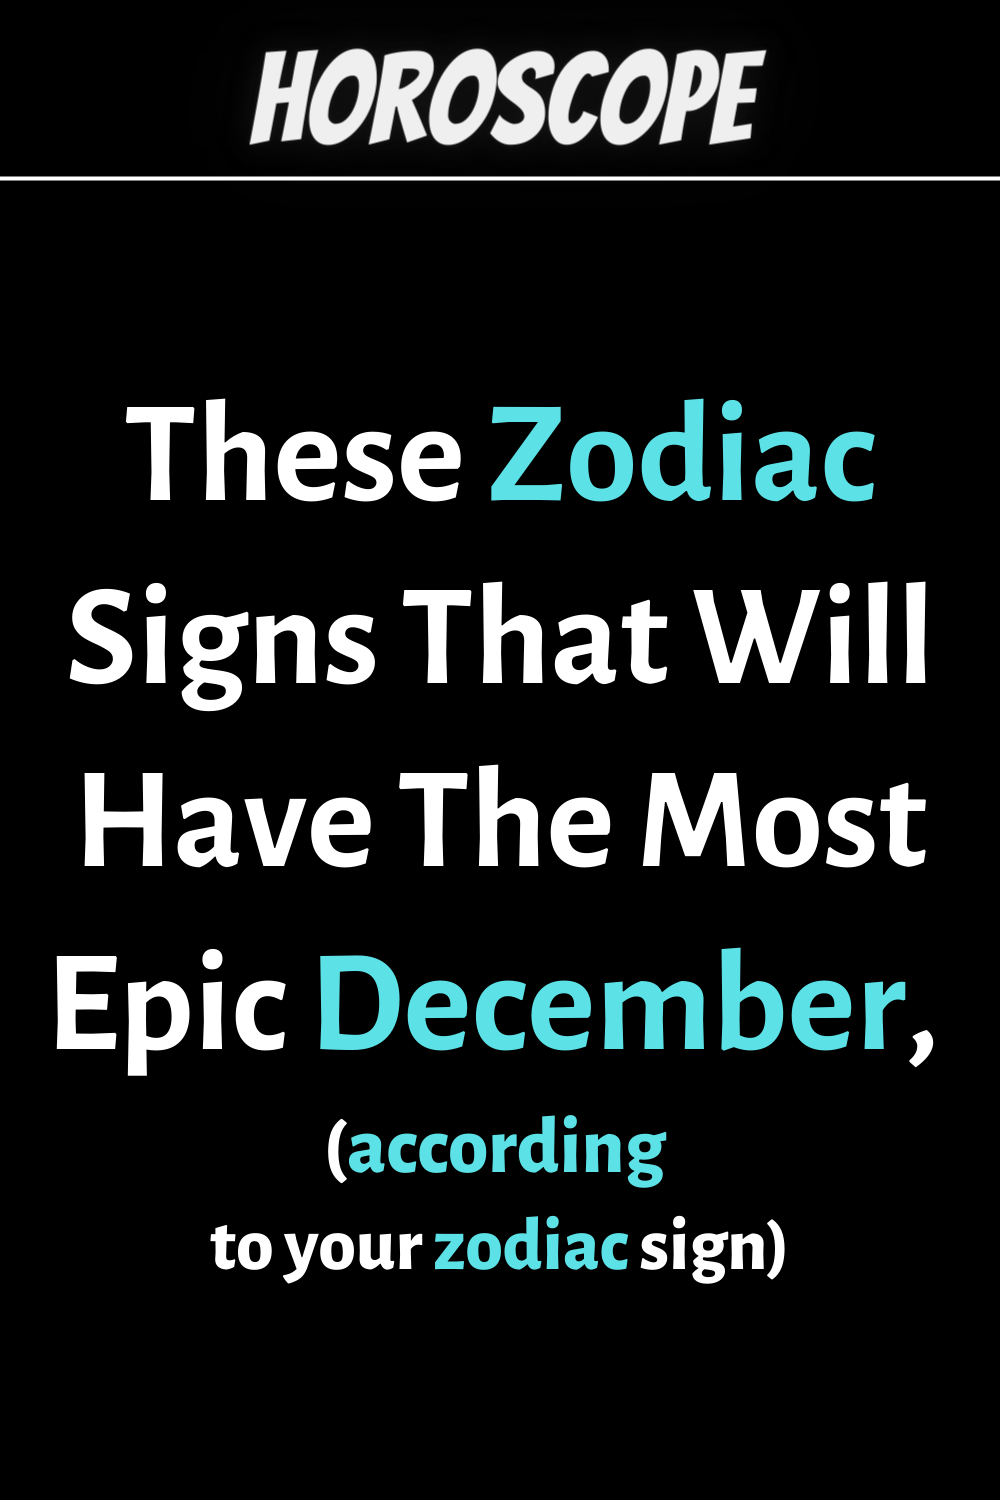 These Zodiac Signs That Will Have The Most Epic December, Based On Zodiac Sign